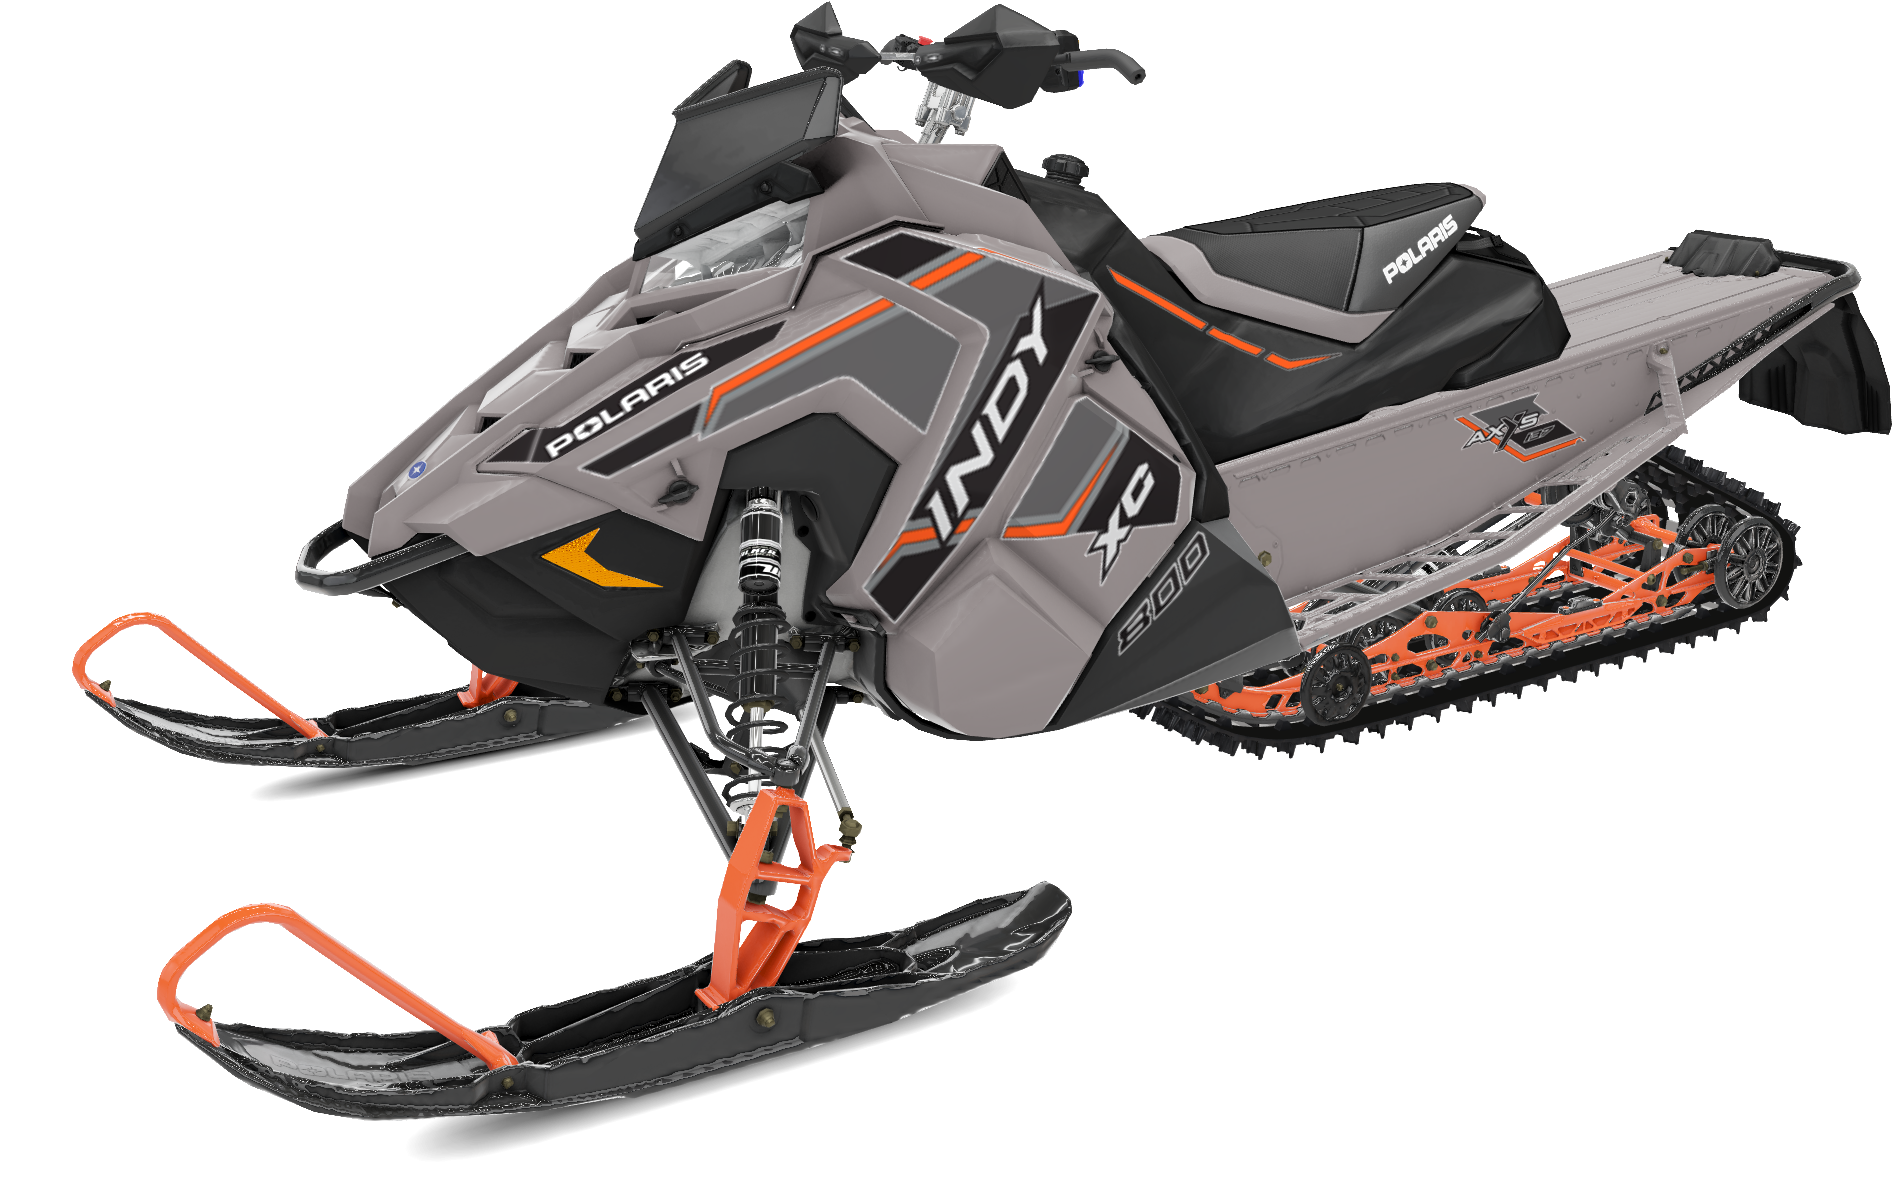 A Grey And Black Snowmobile